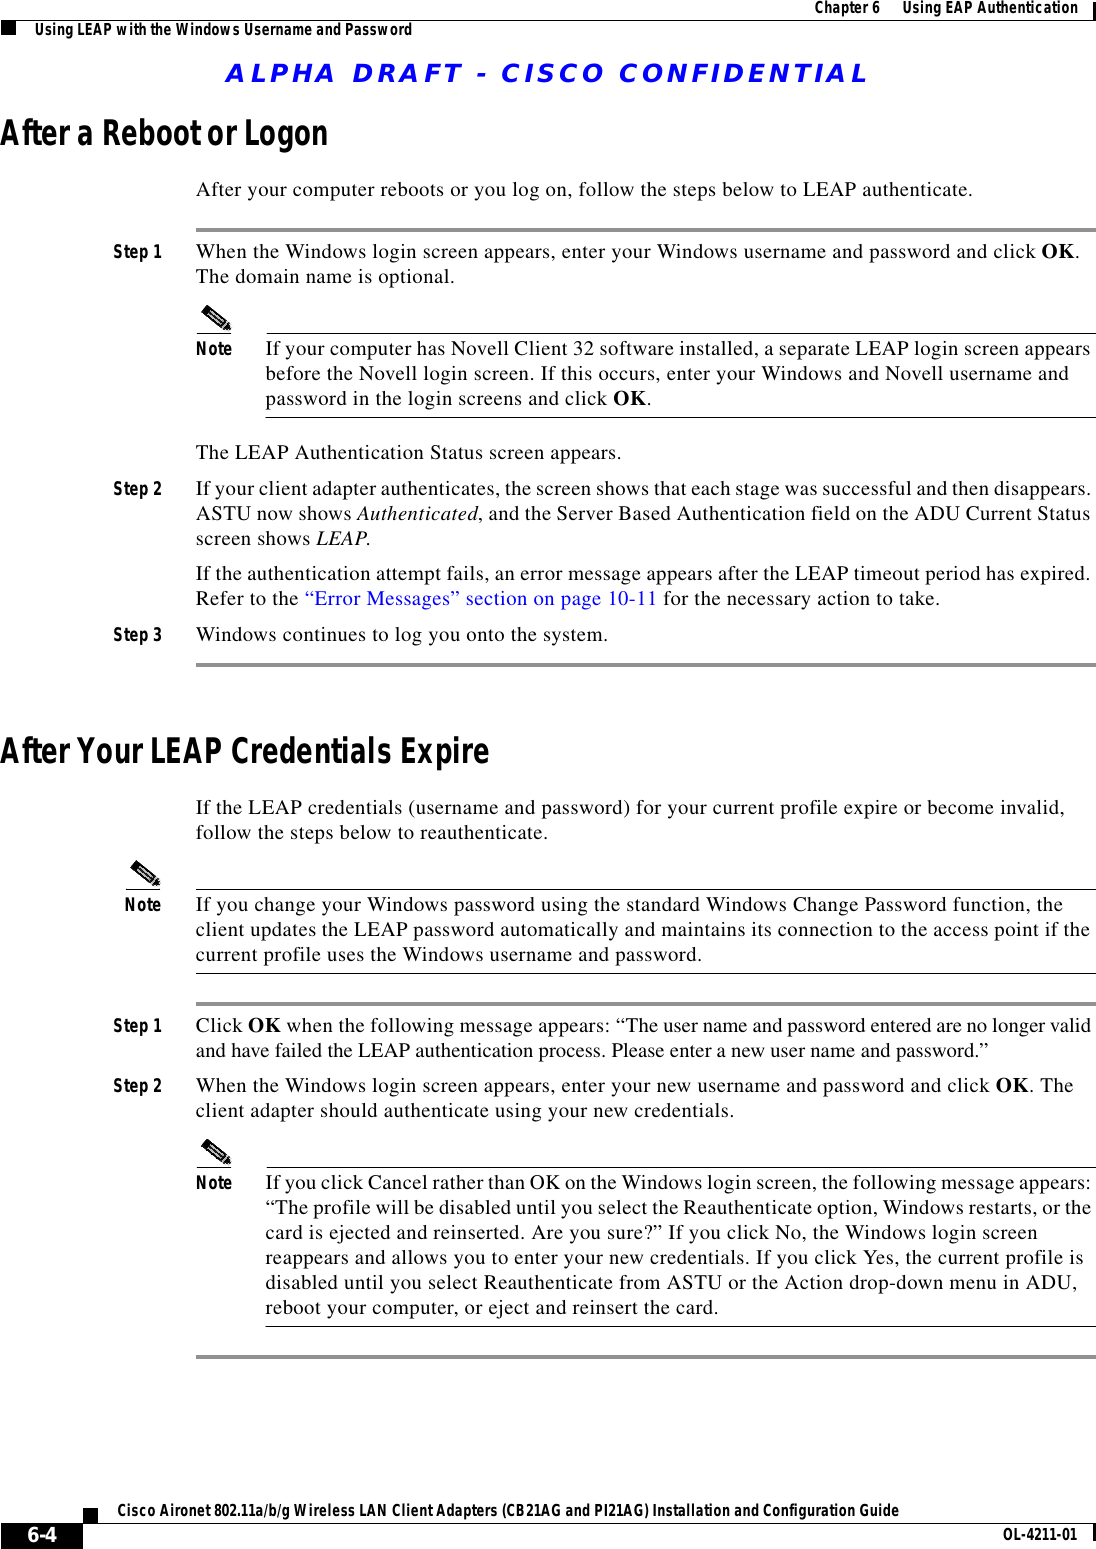 ALPHA DRAFT - CISCO CONFIDENTIAL6-4Cisco Aironet 802.11a/b/g Wireless LAN Client Adapters (CB21AG and PI21AG) Installation and Configuration Guide OL-4211-01Chapter 6      Using EAP AuthenticationUsing LEAP with the Windows Username and PasswordAfter a Reboot or LogonAfter your computer reboots or you log on, follow the steps below to LEAP authenticate.Step 1 When the Windows login screen appears, enter your Windows username and password and click OK. The domain name is optional.Note If your computer has Novell Client 32 software installed, a separate LEAP login screen appears before the Novell login screen. If this occurs, enter your Windows and Novell username and password in the login screens and click OK.The LEAP Authentication Status screen appears.Step 2 If your client adapter authenticates, the screen shows that each stage was successful and then disappears. ASTU now shows Authenticated, and the Server Based Authentication field on the ADU Current Status screen shows LEAP.If the authentication attempt fails, an error message appears after the LEAP timeout period has expired. Refer to the “Error Messages” section on page 10-11 for the necessary action to take.Step 3 Windows continues to log you onto the system.After Your LEAP Credentials ExpireIf the LEAP credentials (username and password) for your current profile expire or become invalid, follow the steps below to reauthenticate.Note If you change your Windows password using the standard Windows Change Password function, the client updates the LEAP password automatically and maintains its connection to the access point if the current profile uses the Windows username and password.Step 1 Click OK when the following message appears: “The user name and password entered are no longer valid and have failed the LEAP authentication process. Please enter a new user name and password.”Step 2 When the Windows login screen appears, enter your new username and password and click OK. The client adapter should authenticate using your new credentials.Note If you click Cancel rather than OK on the Windows login screen, the following message appears: “The profile will be disabled until you select the Reauthenticate option, Windows restarts, or the card is ejected and reinserted. Are you sure?” If you click No, the Windows login screen reappears and allows you to enter your new credentials. If you click Yes, the current profile is disabled until you select Reauthenticate from ASTU or the Action drop-down menu in ADU, reboot your computer, or eject and reinsert the card.